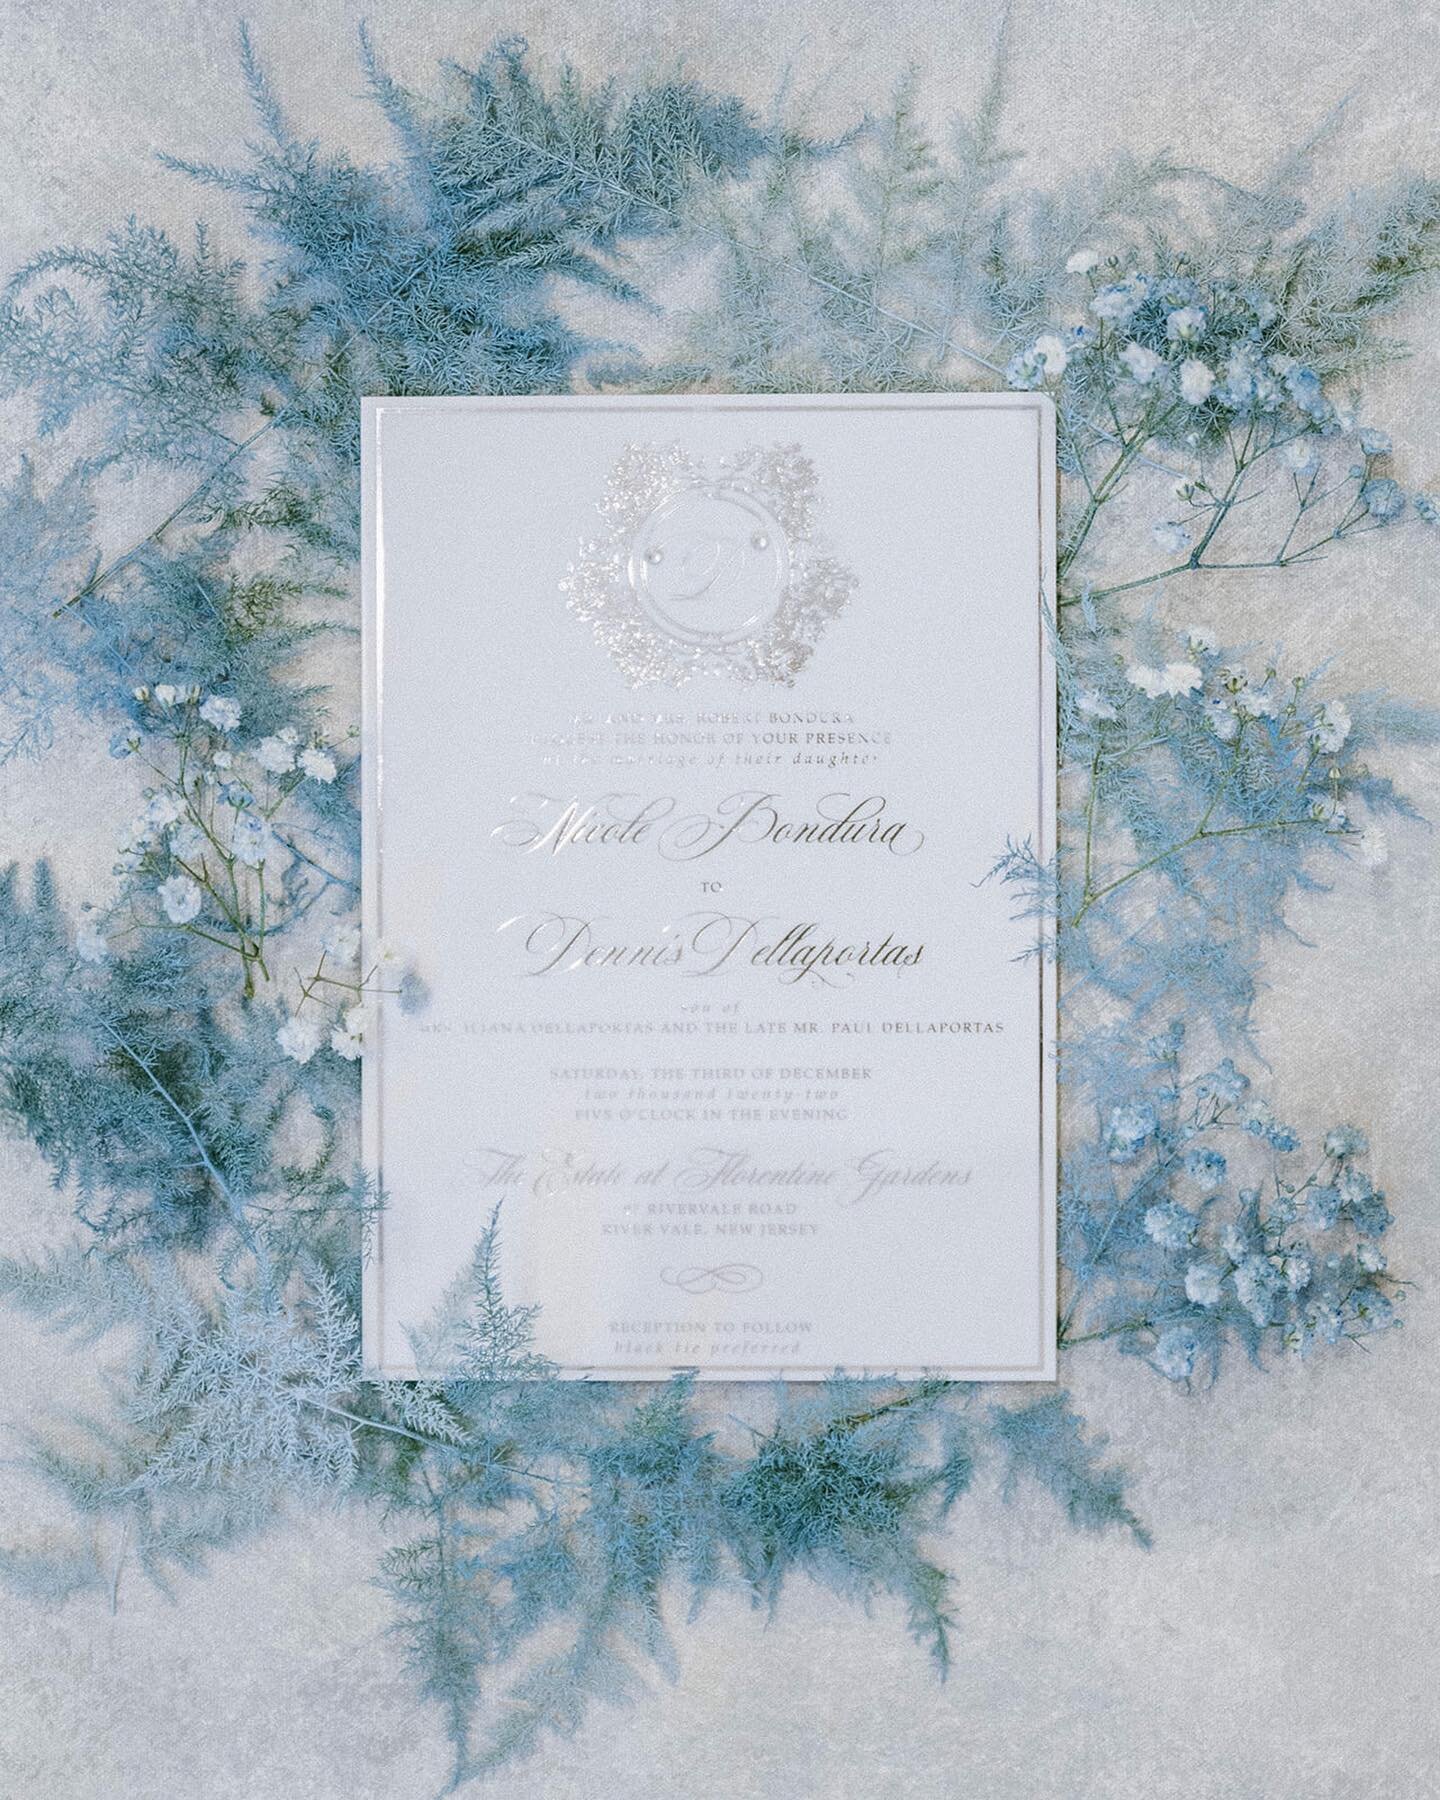 𝑴𝑹. 𝑨𝑵𝑫 𝑴𝑹𝑺. 𝑫𝑬𝑳𝑳𝑨𝑷𝑶𝑹𝑻𝑨𝑺 ❄️

How gorgeous is this enchanted winter wedding for our beautiful couple @nicoledellaportas_ and Dennis at the @florentinegardensnj ?!

Amazing planning, styling, + design by the talented @jennyorsini ✨

